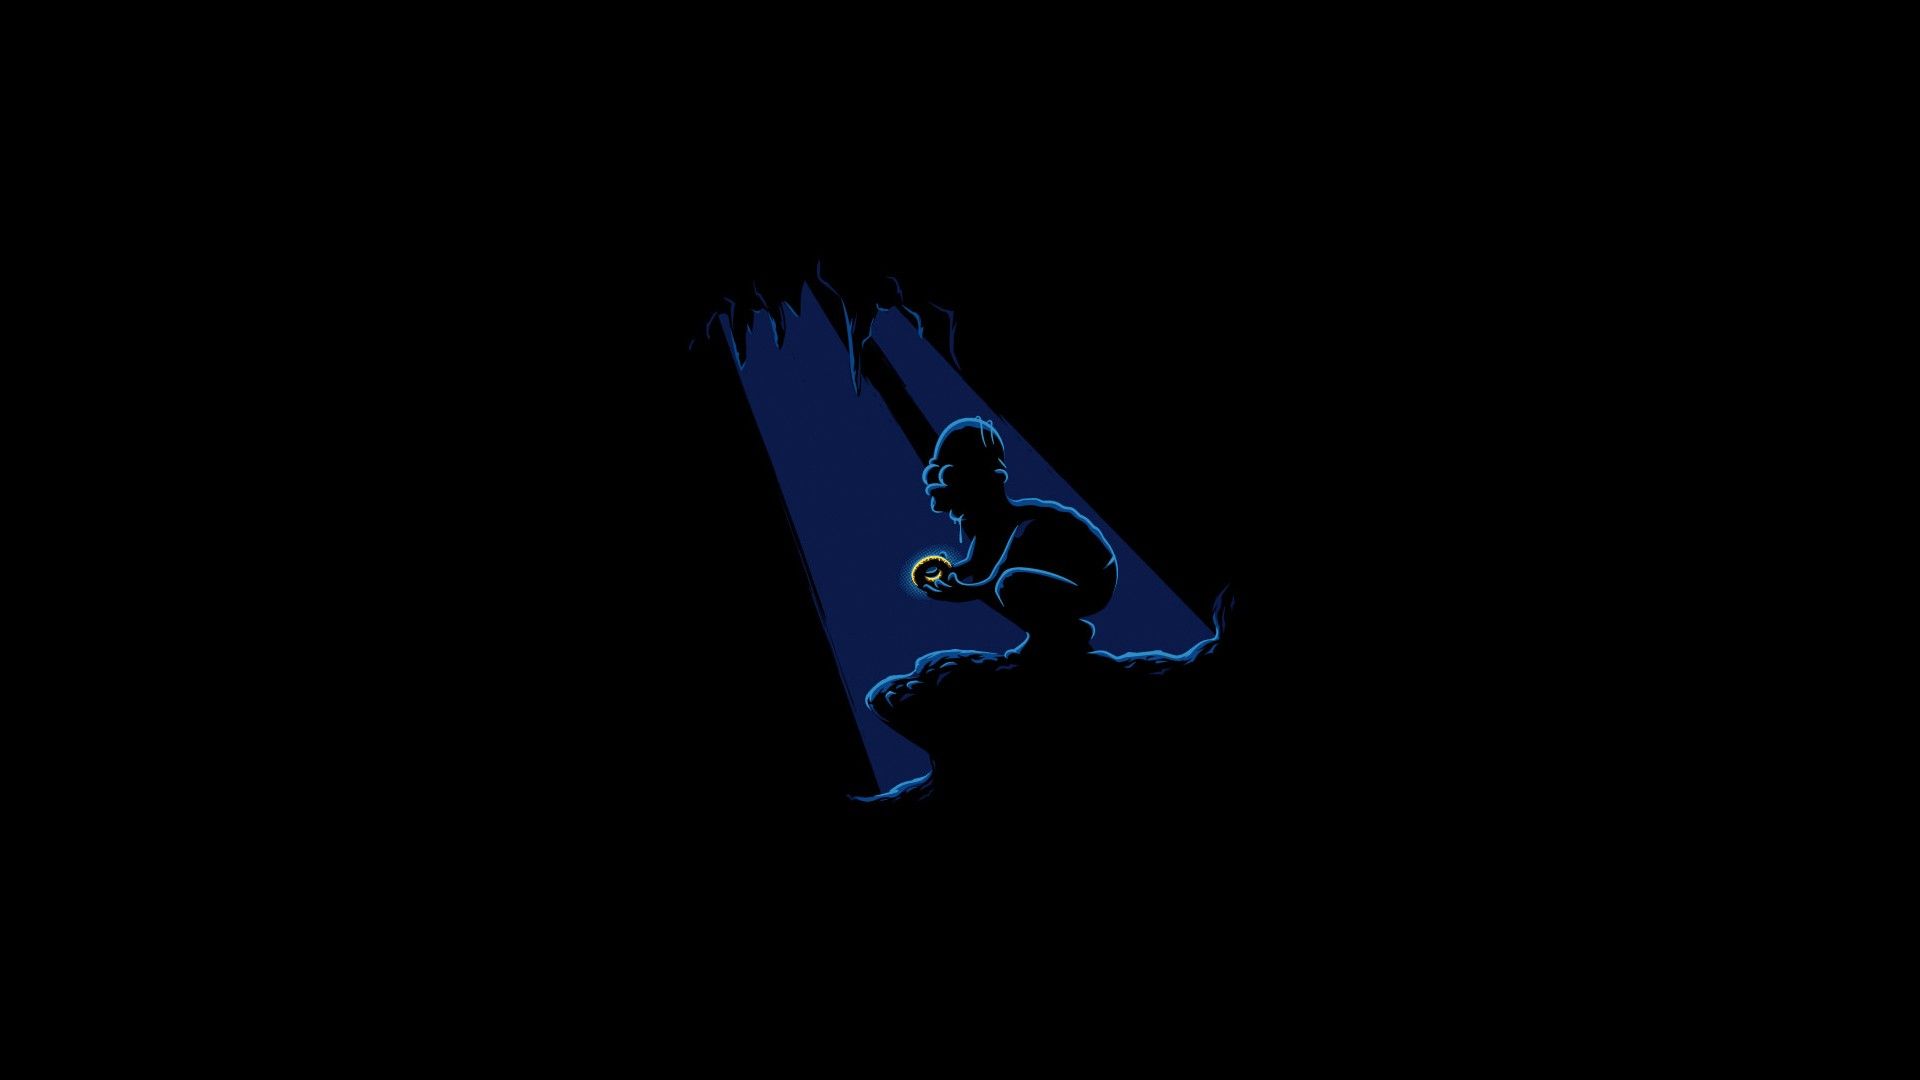 Homer Simpson The Lord of the Rings The Simpsons crossovers wallpaperx1080